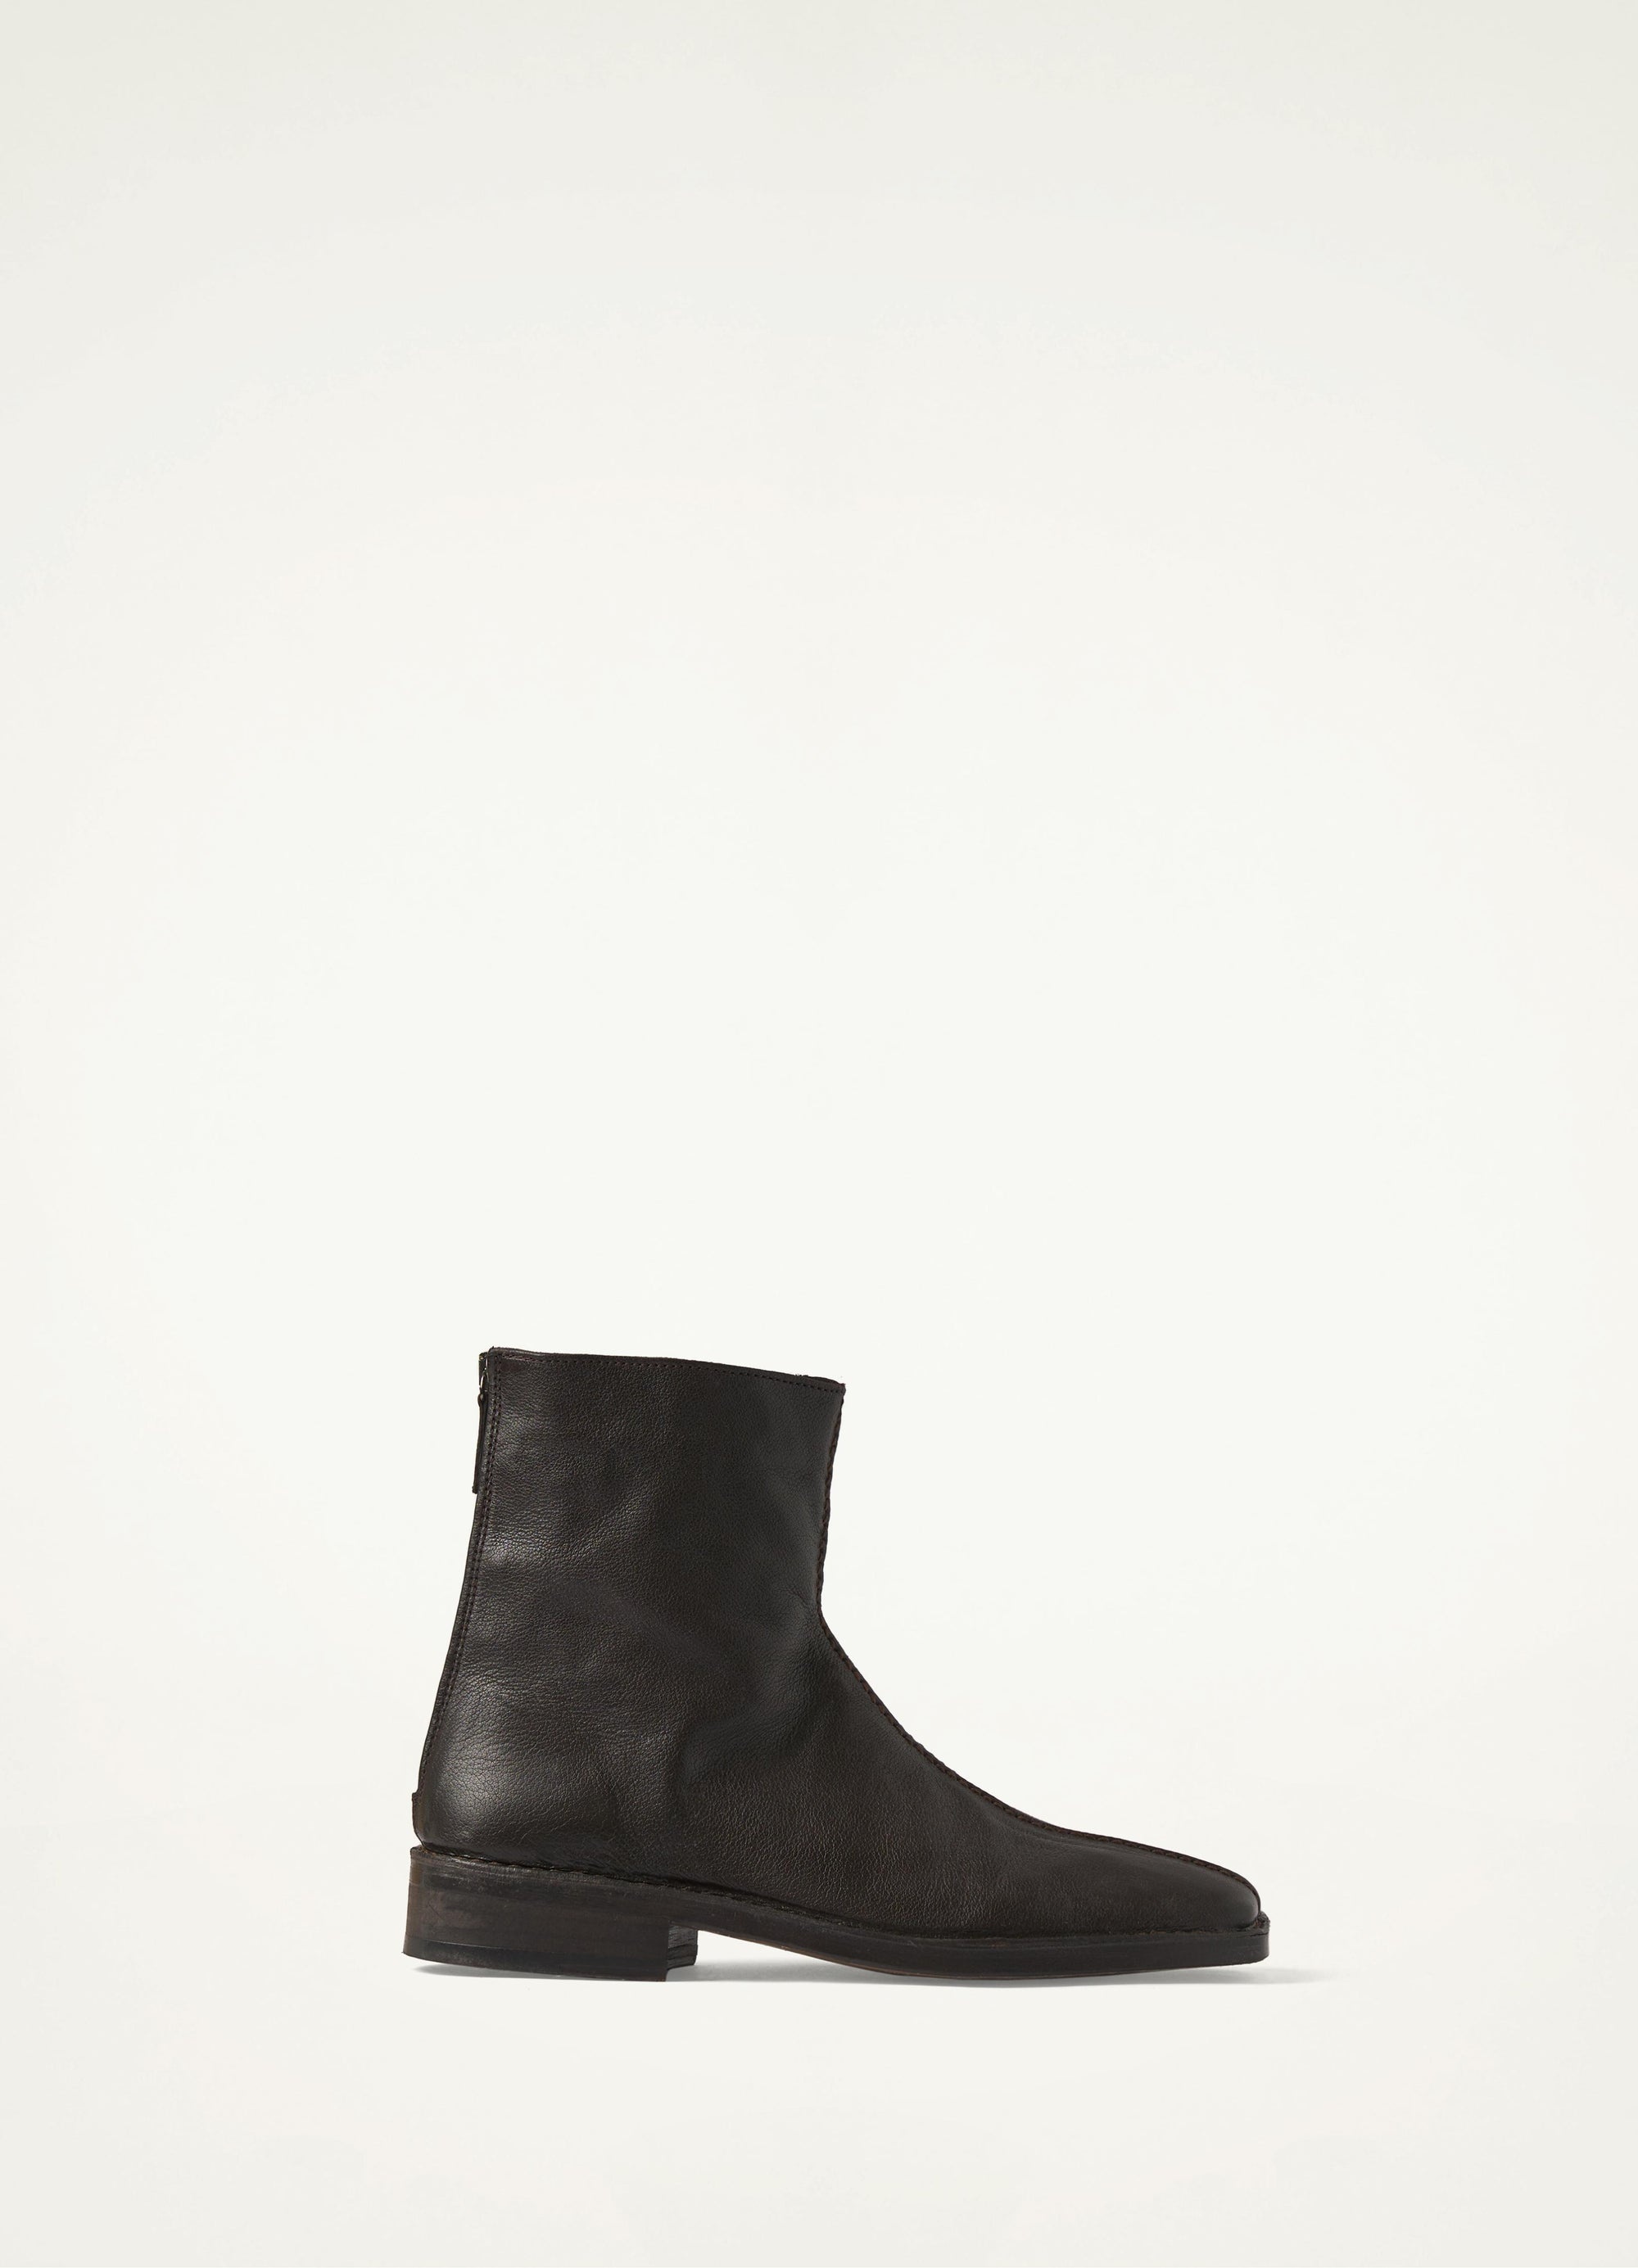 PIPED ZIPPED BOOTS
SOFT LEATHER - 1